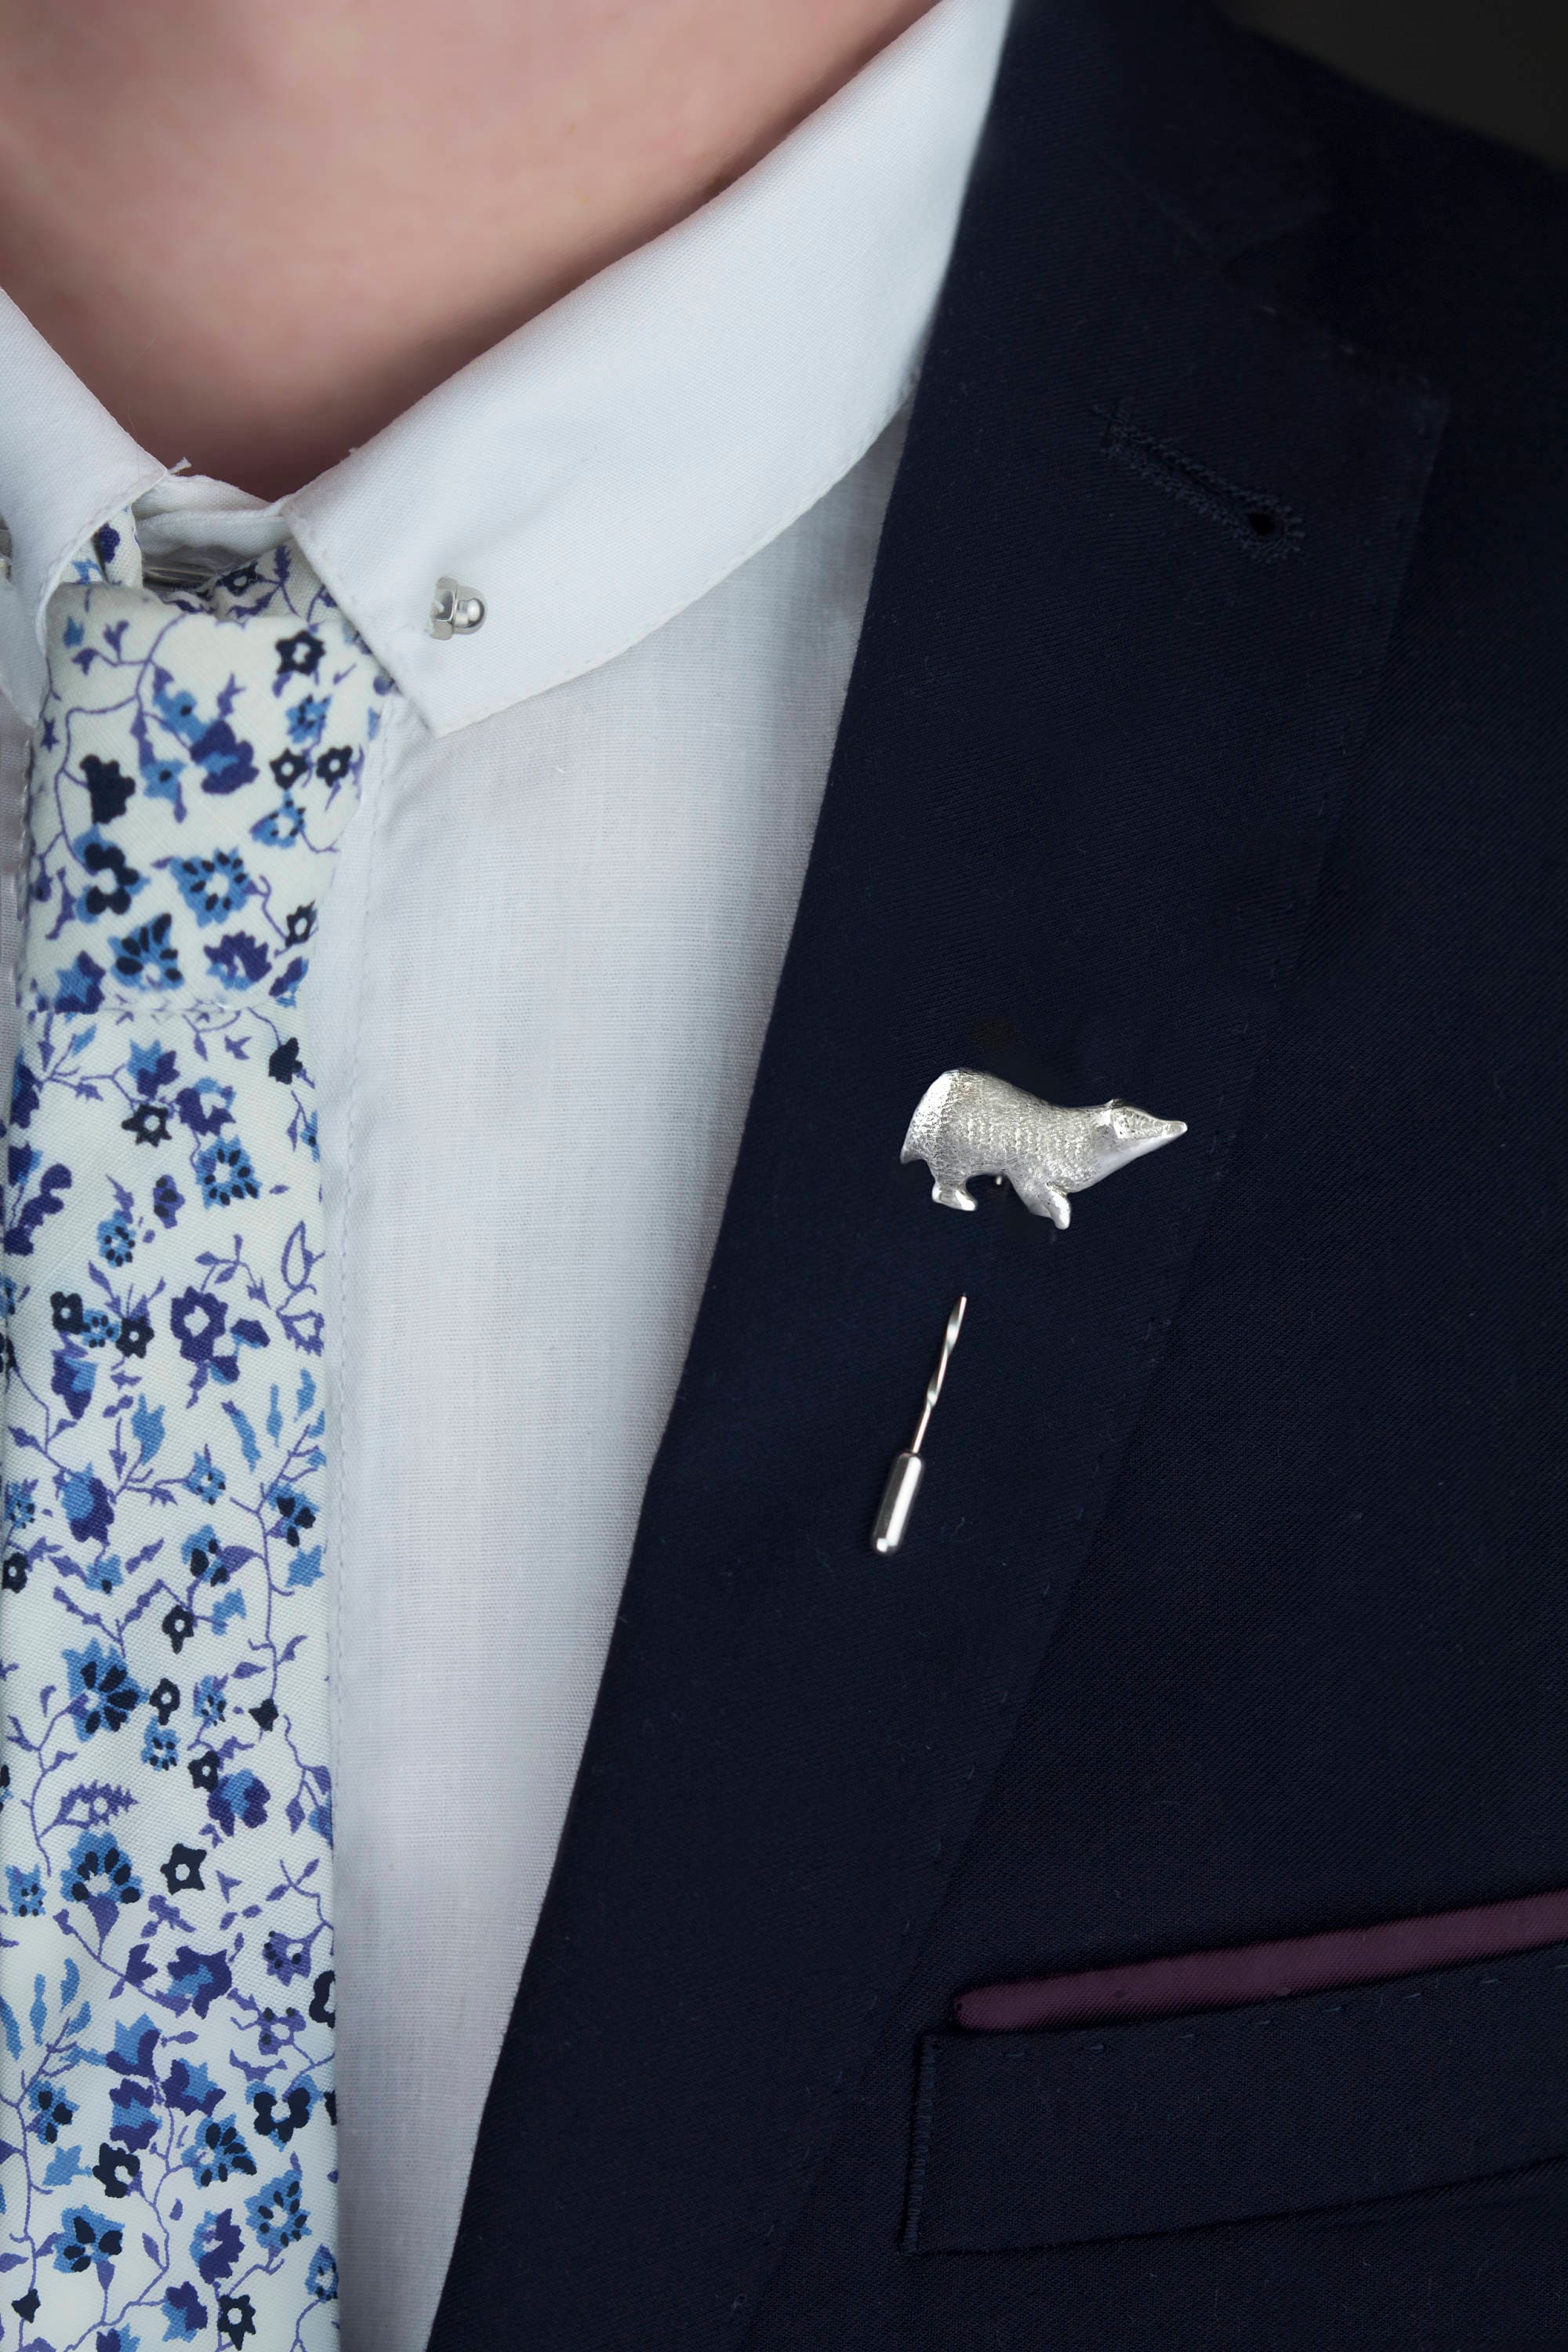 Badger Lapel Pin Boutonniere, Hand Carved Design. Sterling Silver Or Brooch. Animal Gift For Him By Rosalind Elunyd Jewellery